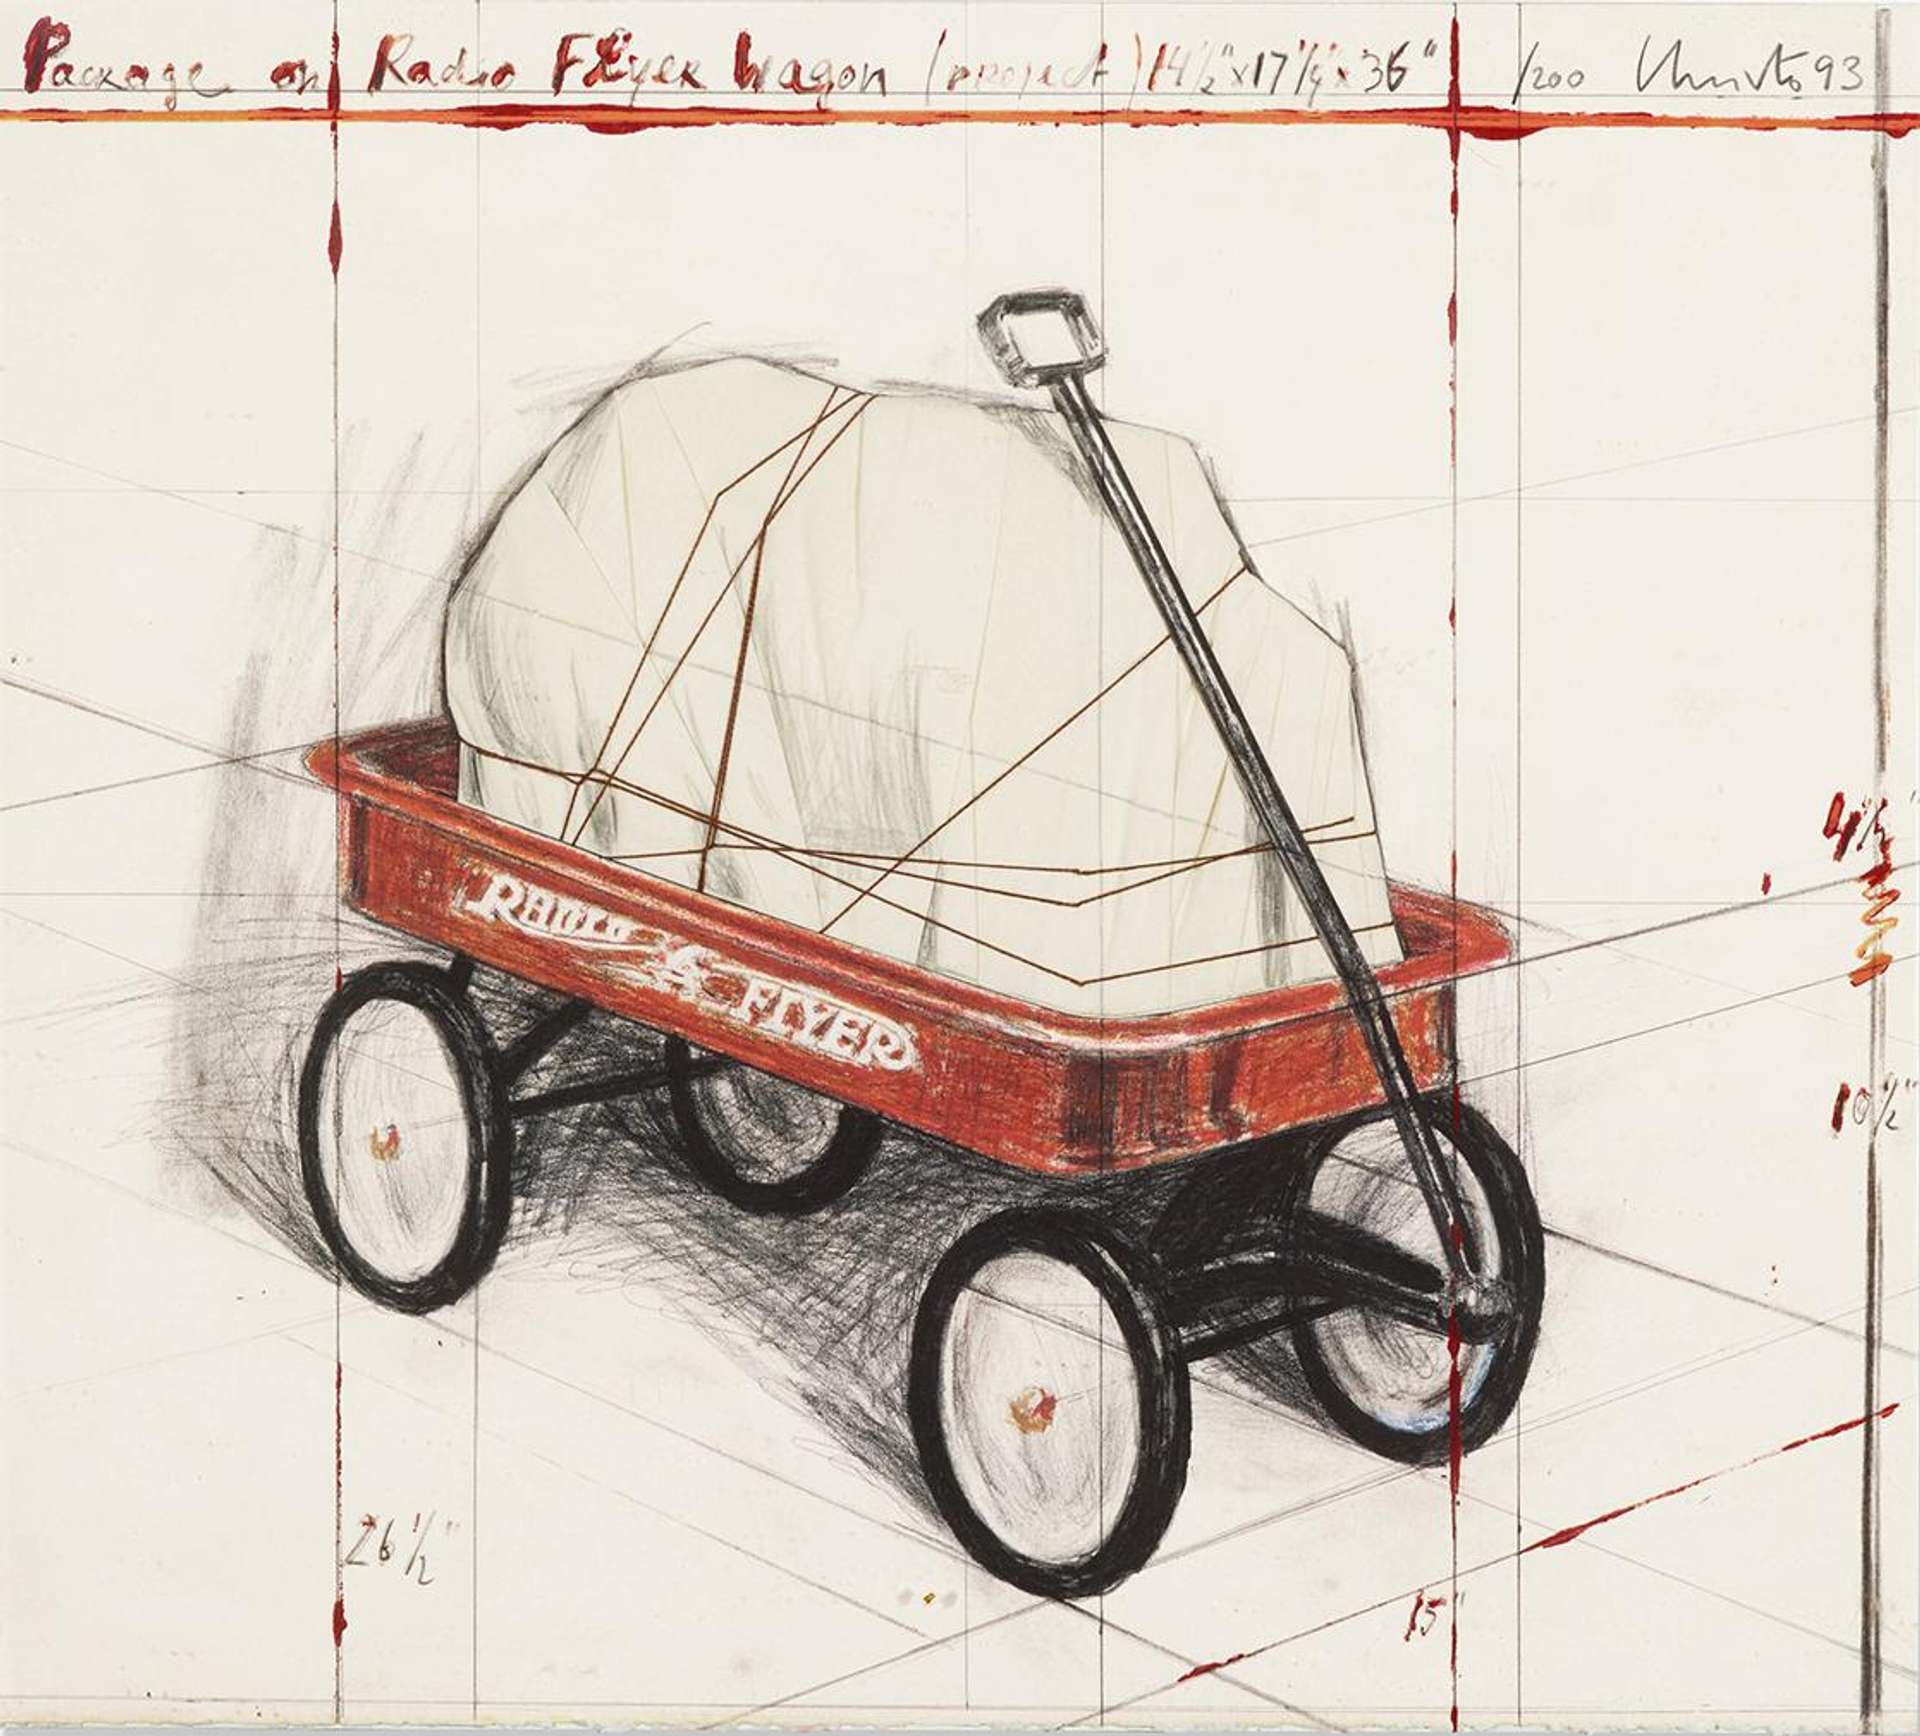 Package On Radio Flyer, Project - Signed Print by Christo 1993 - MyArtBroker